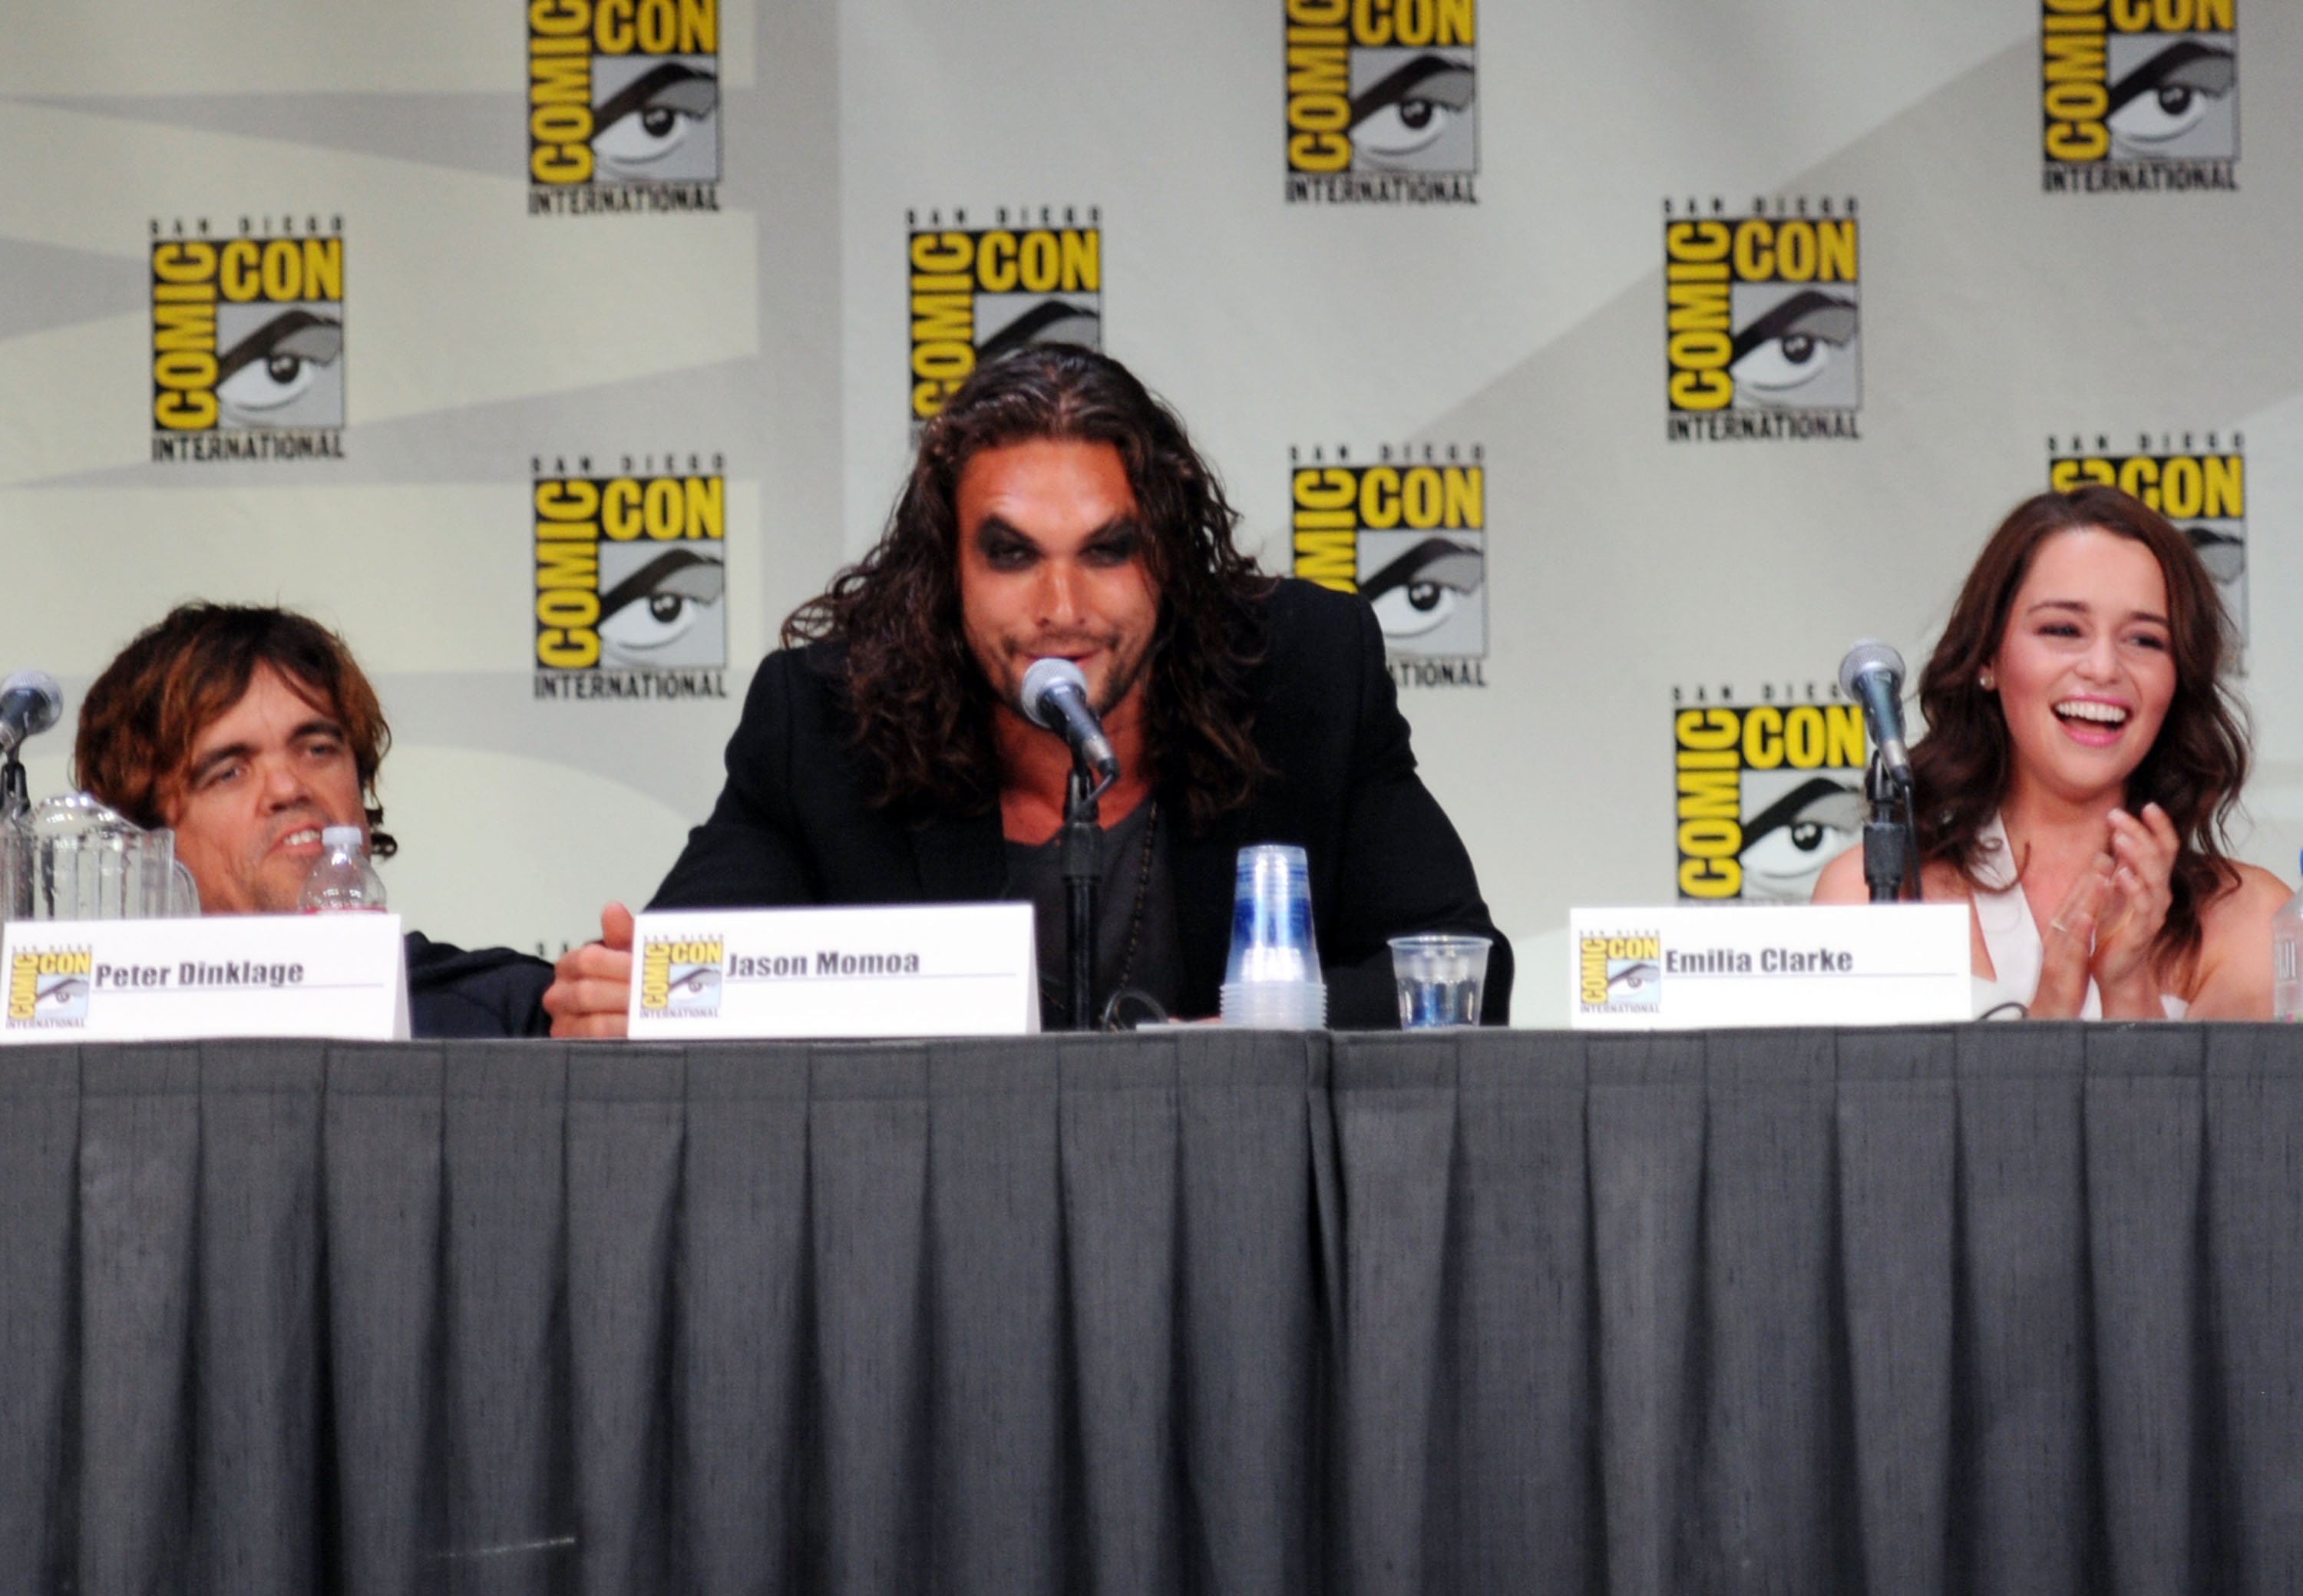 Peter Dinklage, Jason Momoa, and Emilia Clarke at Comic-Con 2011.